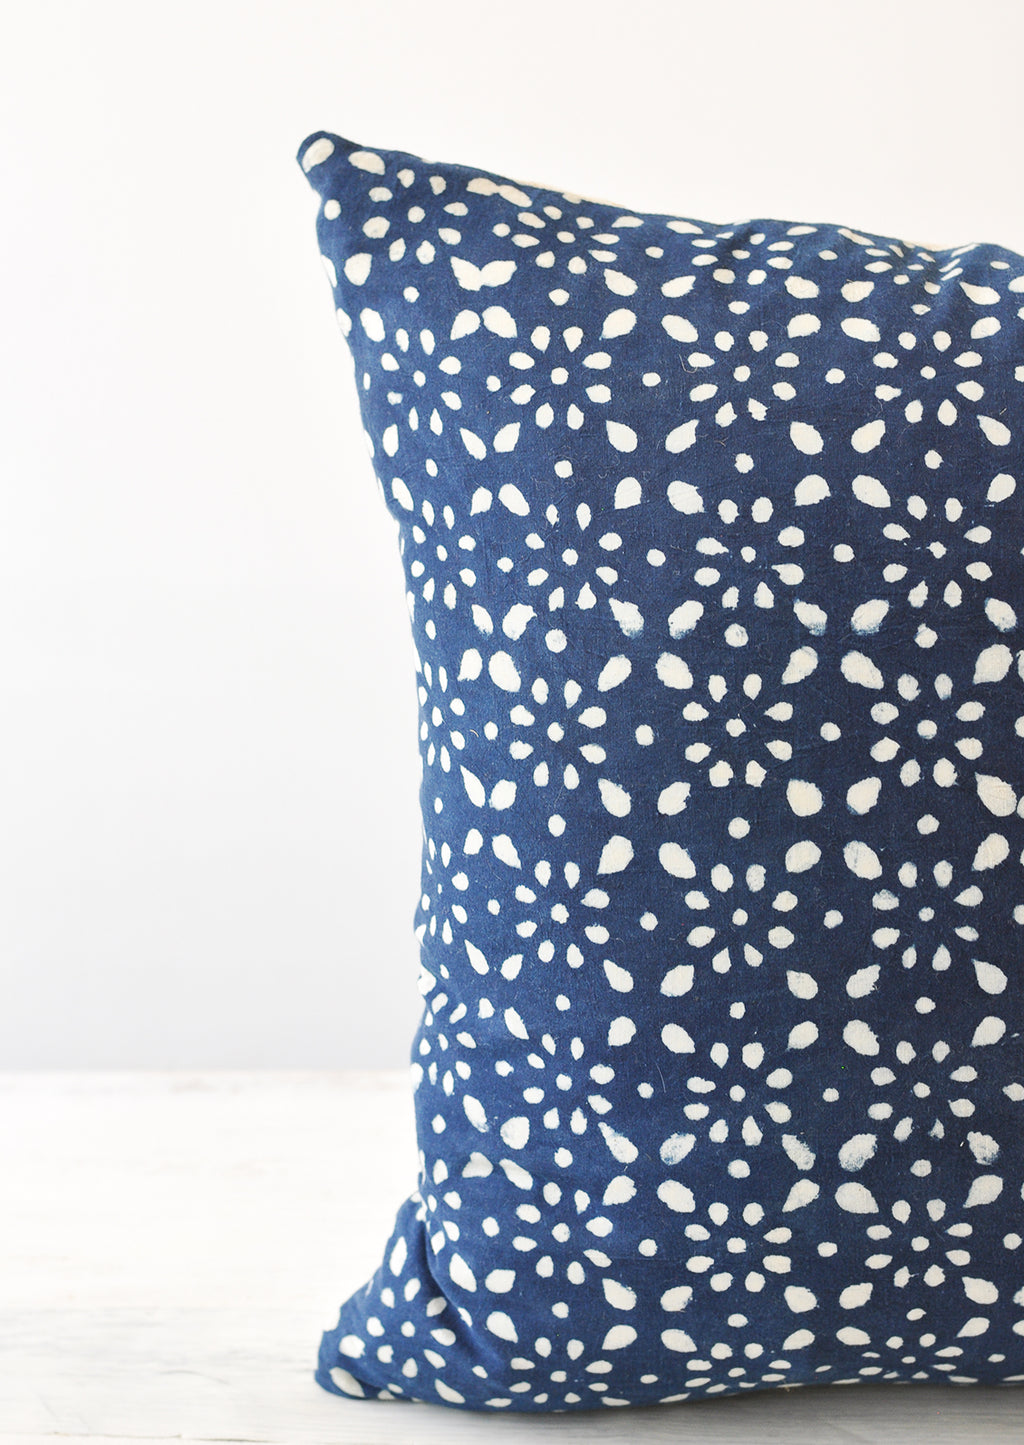 2: A detail shot of a square indigo and white block printed pillow.